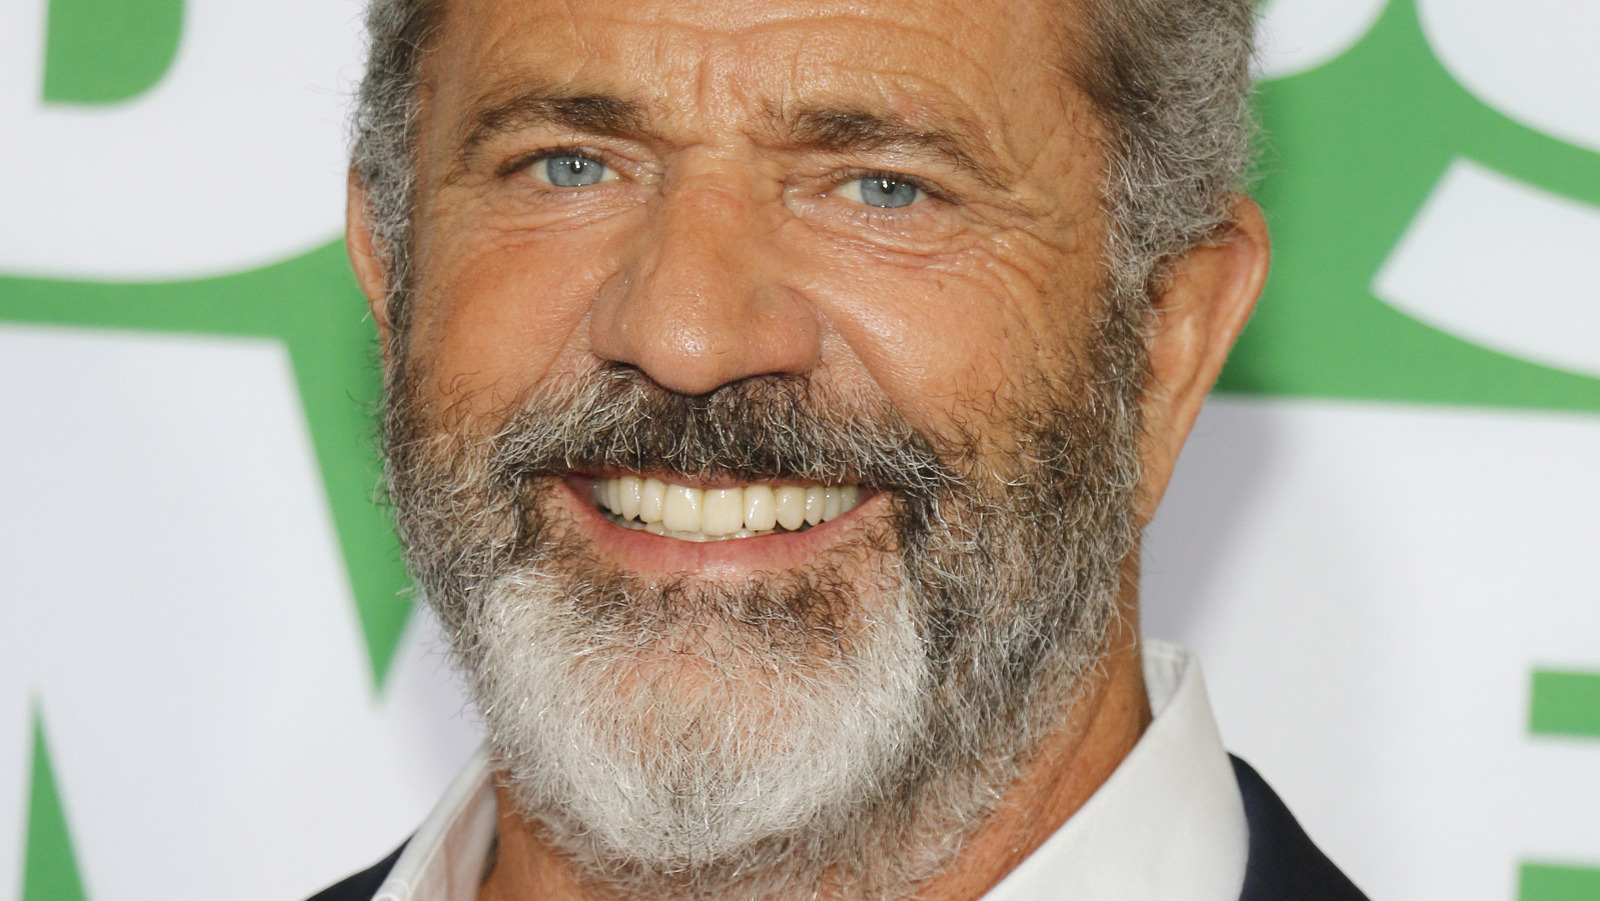 The Truth About Mel Gibson And Donald Trump